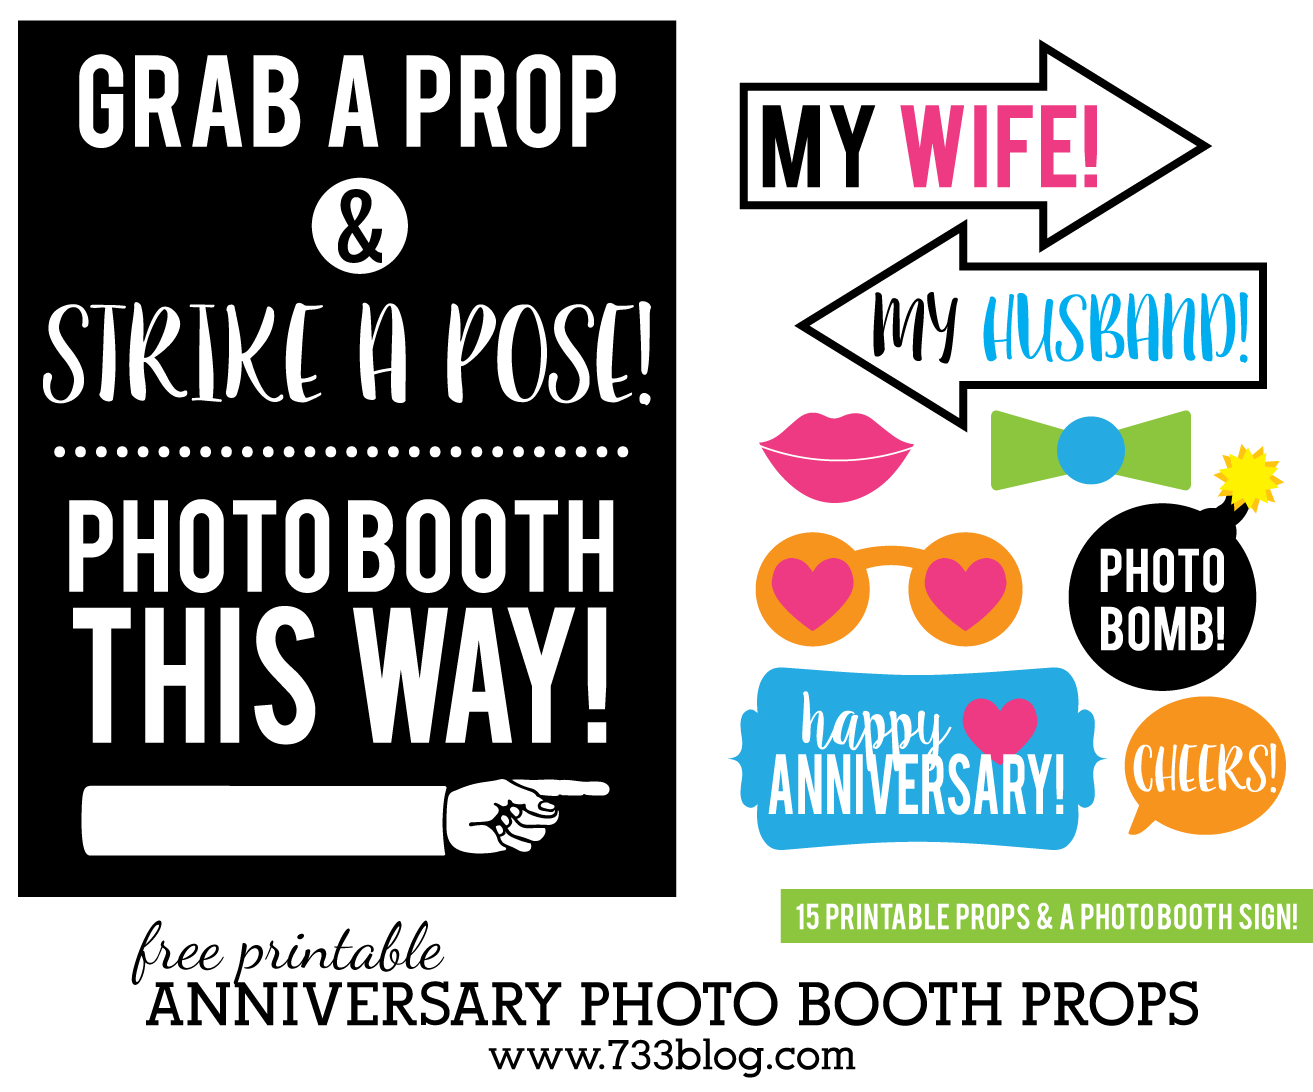 Printable Anniversary Photo Booth Props Inspiration Made Simple